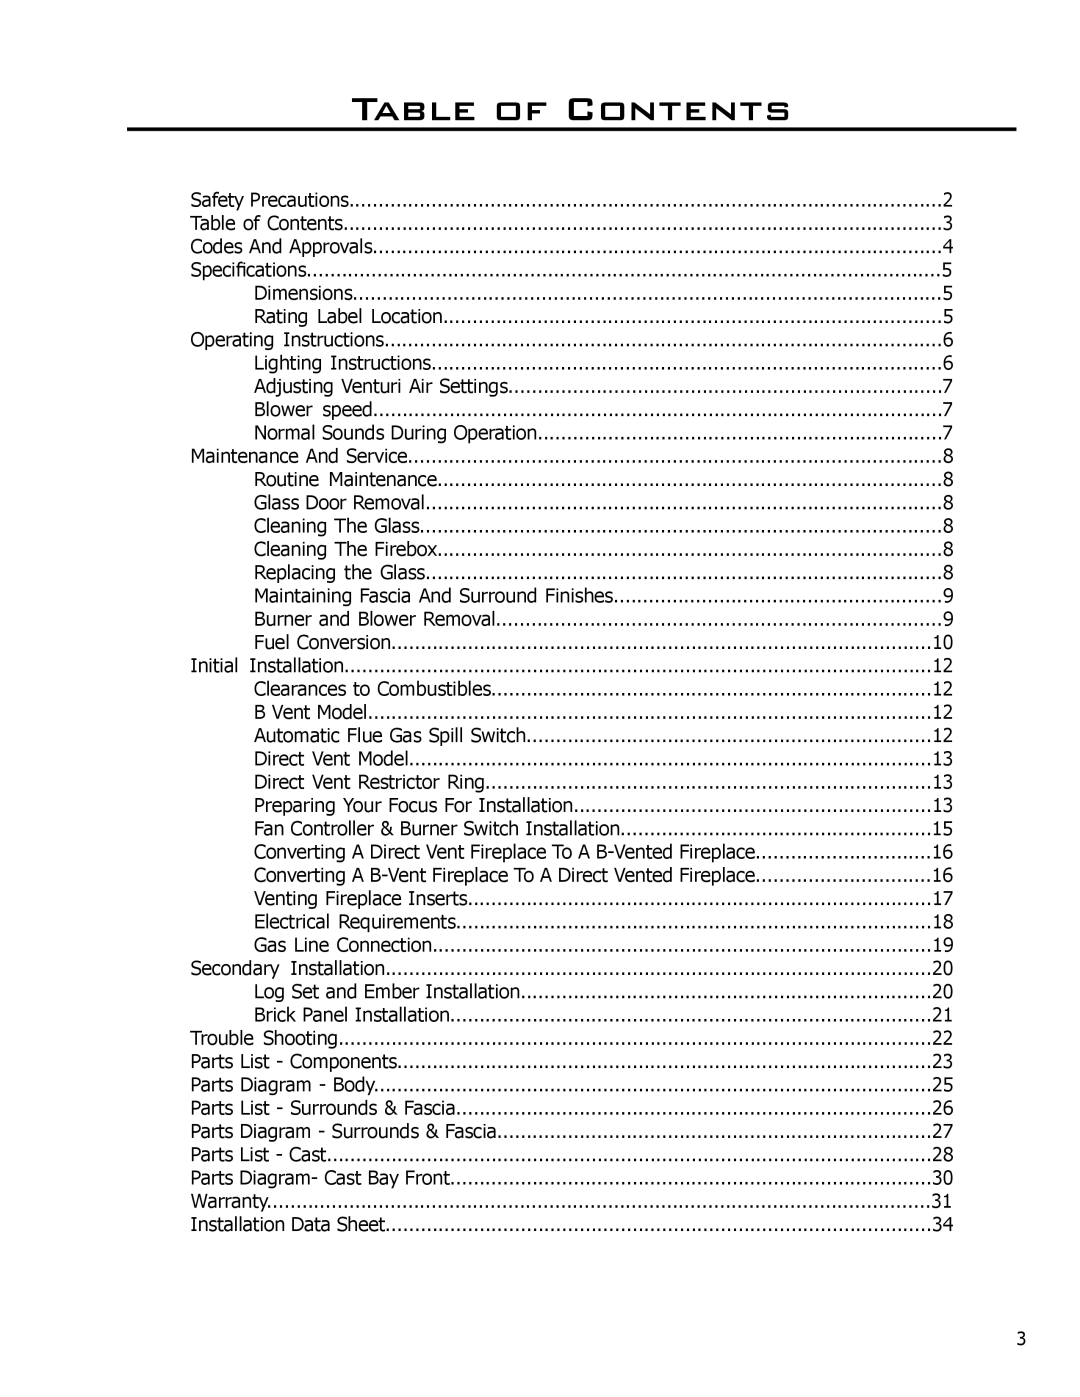 Enviro C-11288 owner manual Table of Contents 